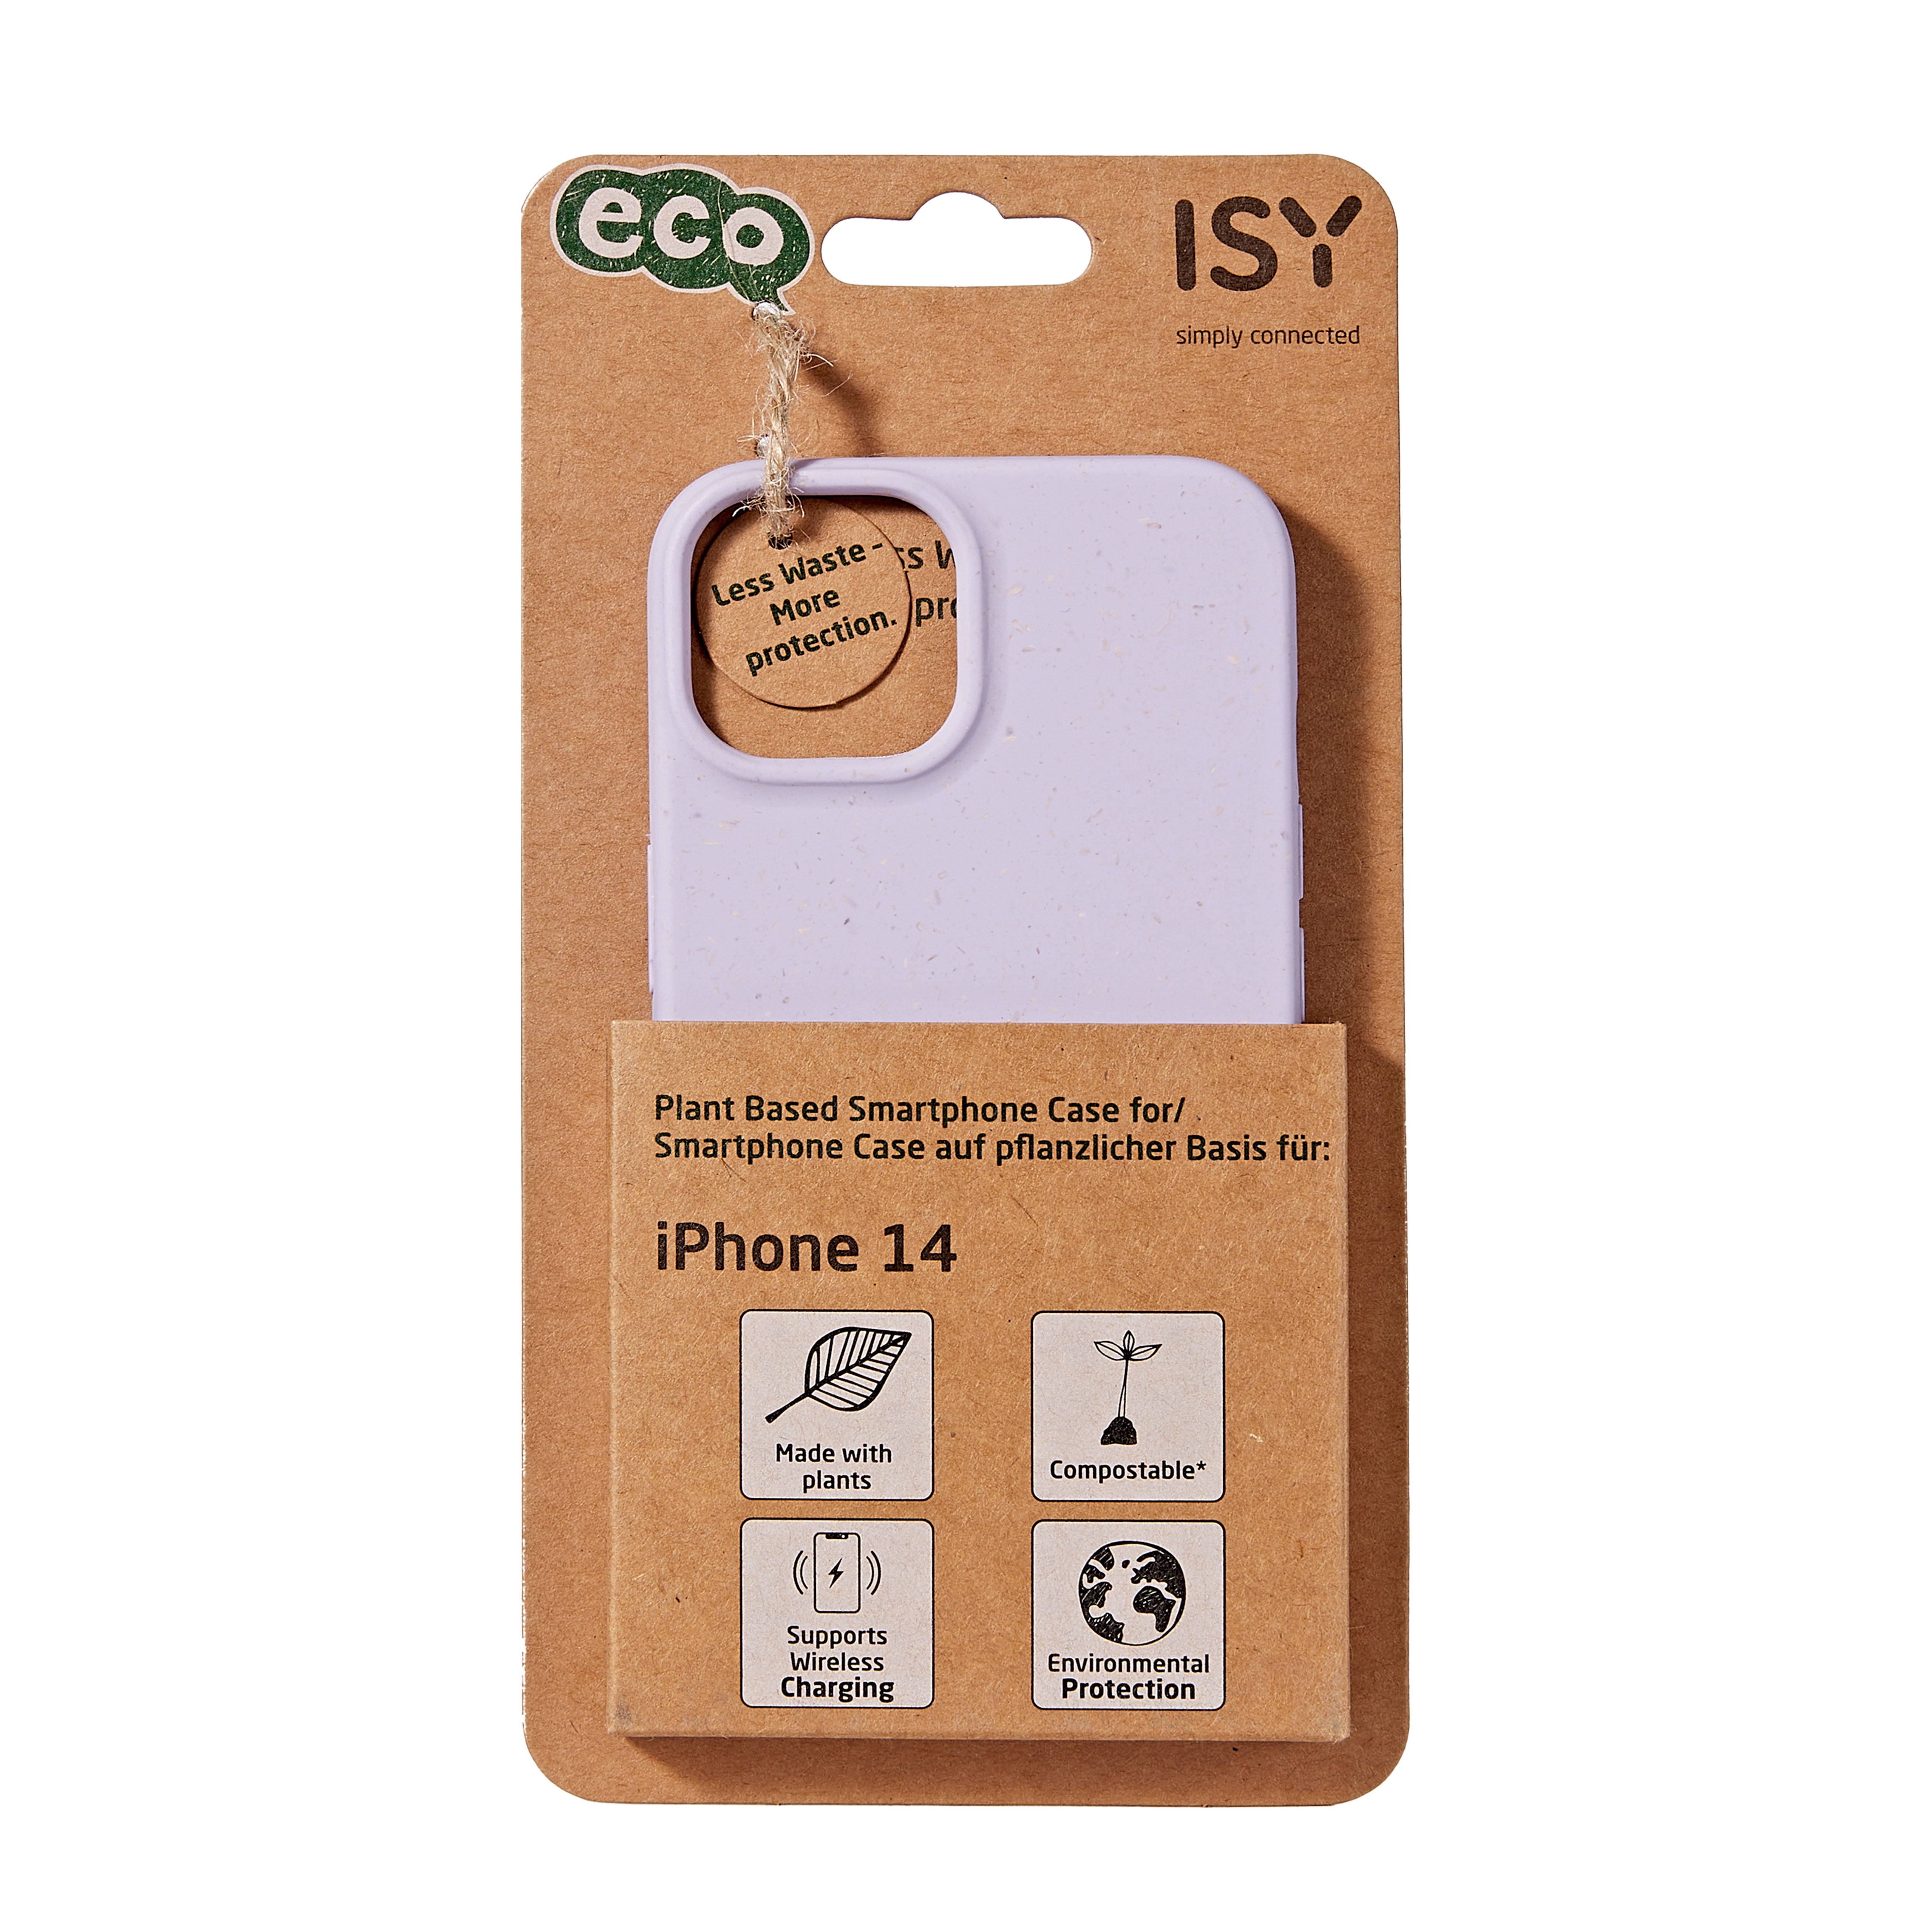 Backcover, 14, ISC-6024, iPhone Violett Apple, ISY